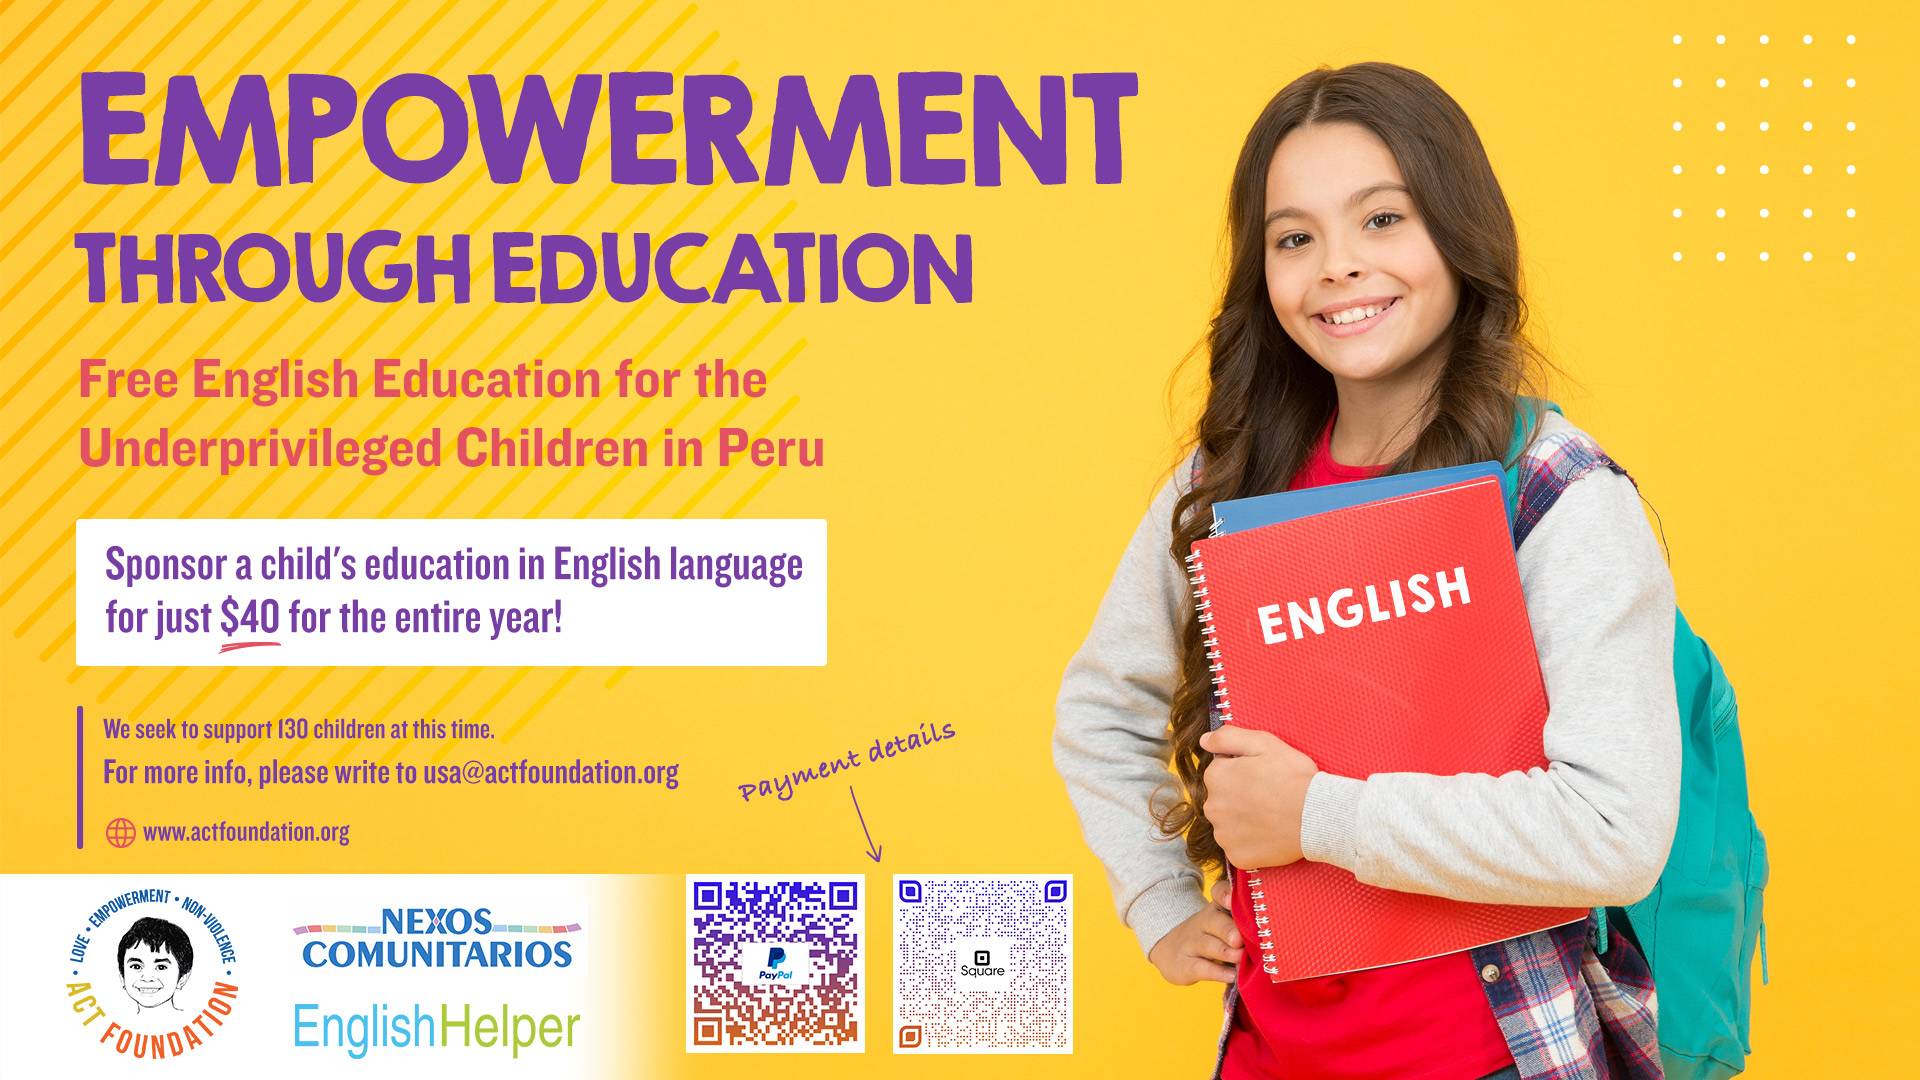 English learning for children in Peru